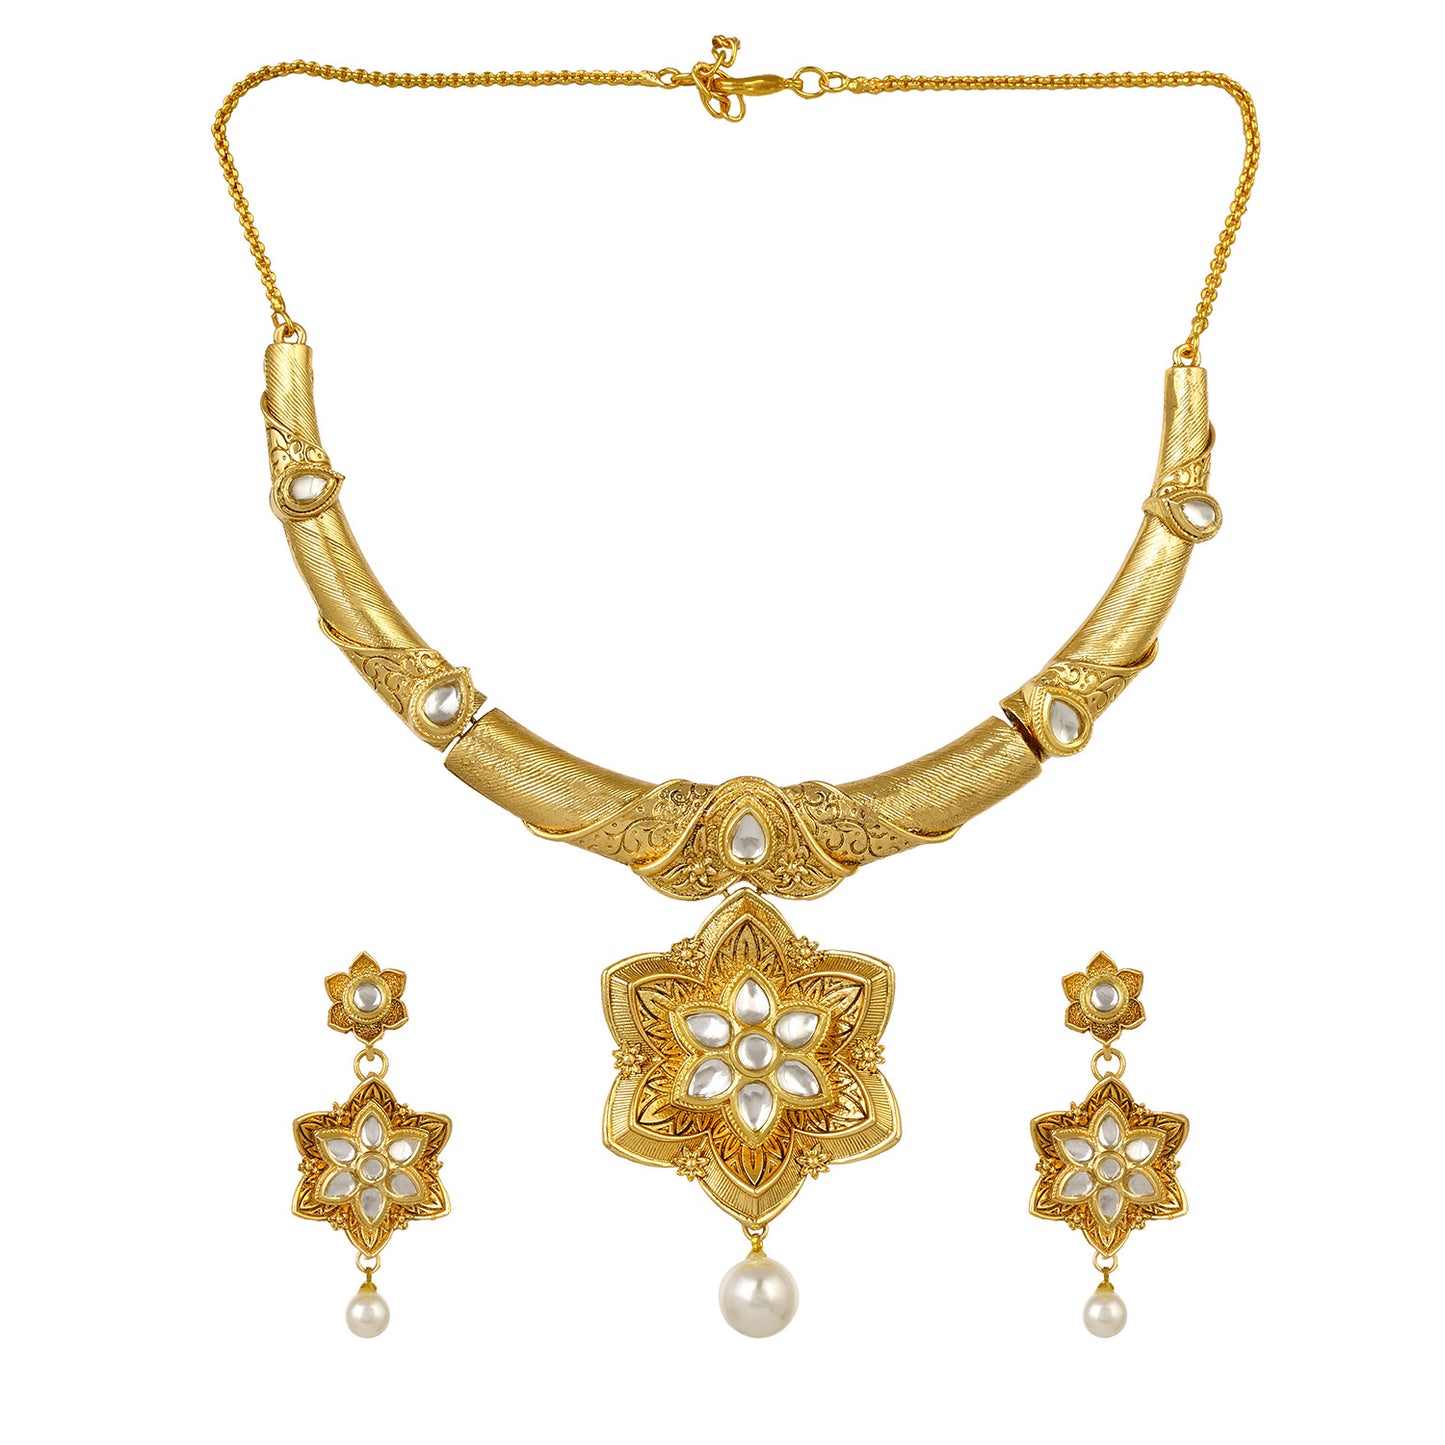 Gold Plated Kundan Necklace and Earrings Imitation Jewelry Set for Women and Girls